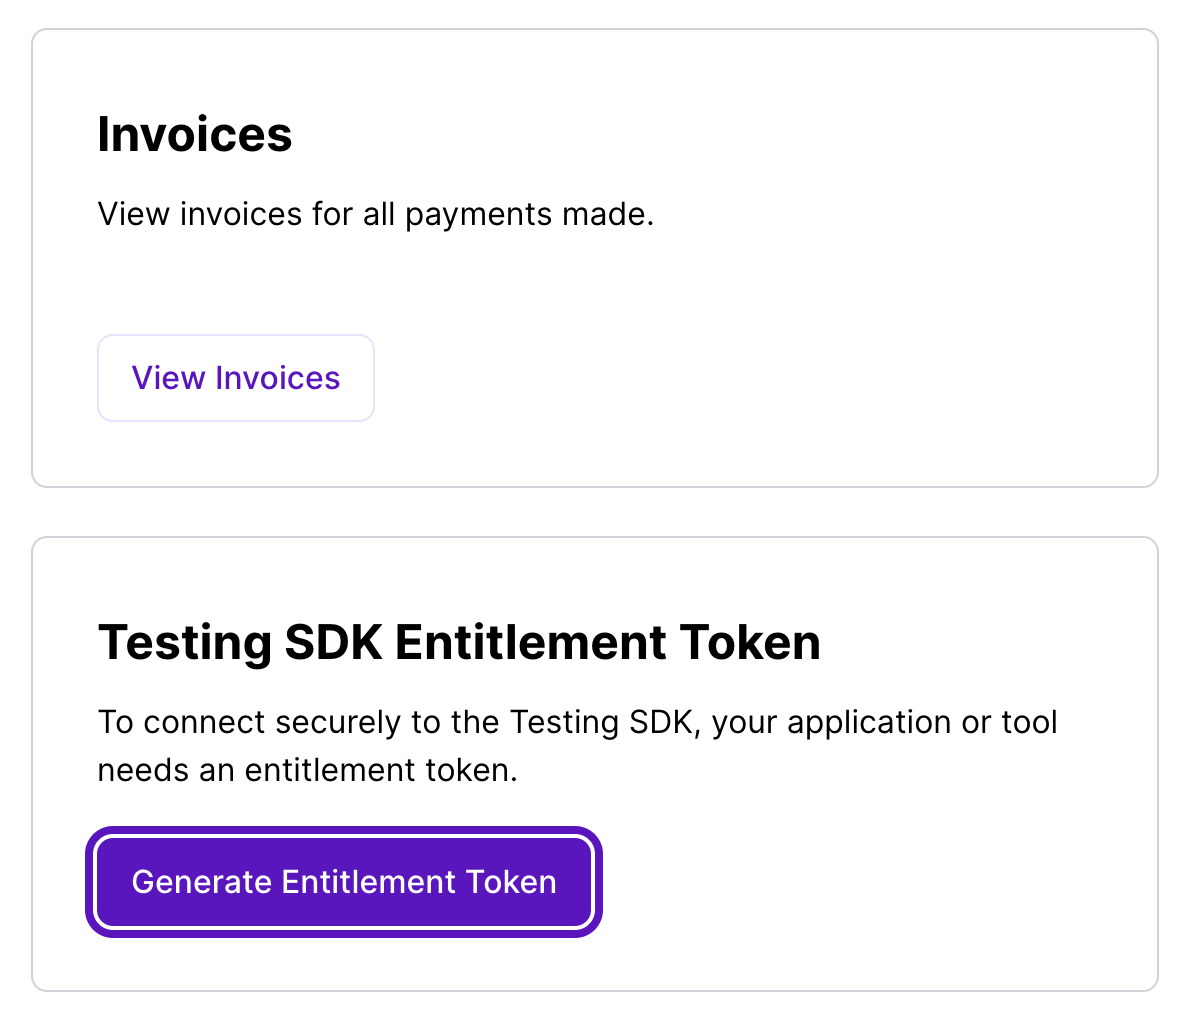 Screenshot of a portion of the My Account page on the AudioEye Customer Portal. The screenshot shows the Testing SDK Entitlement Token card and the Generate Entitlement Token button inside the card is highlighted.